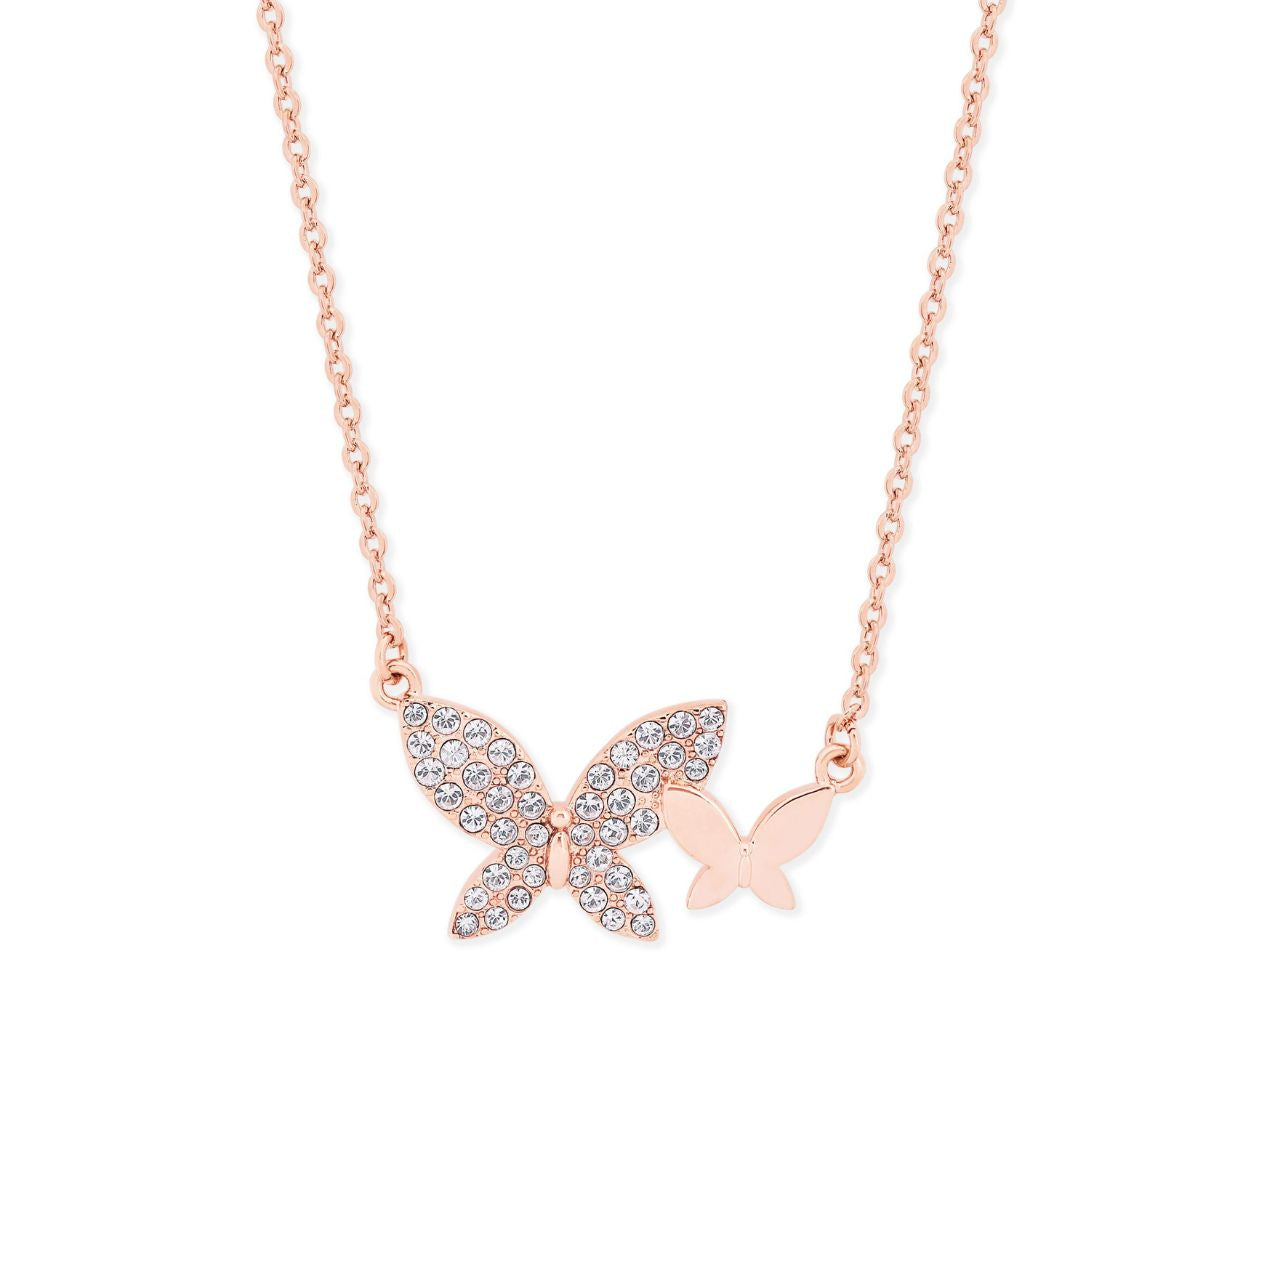 Tipperary Crystal Butterfly Pave Pendant  Drawing inspiration from urban garden, the Tipperary Crystal Butterfly collection transforms an icon into something modern and unexpected. Playful and elegant, this collection draws from the inherent beauty of the butterfly.